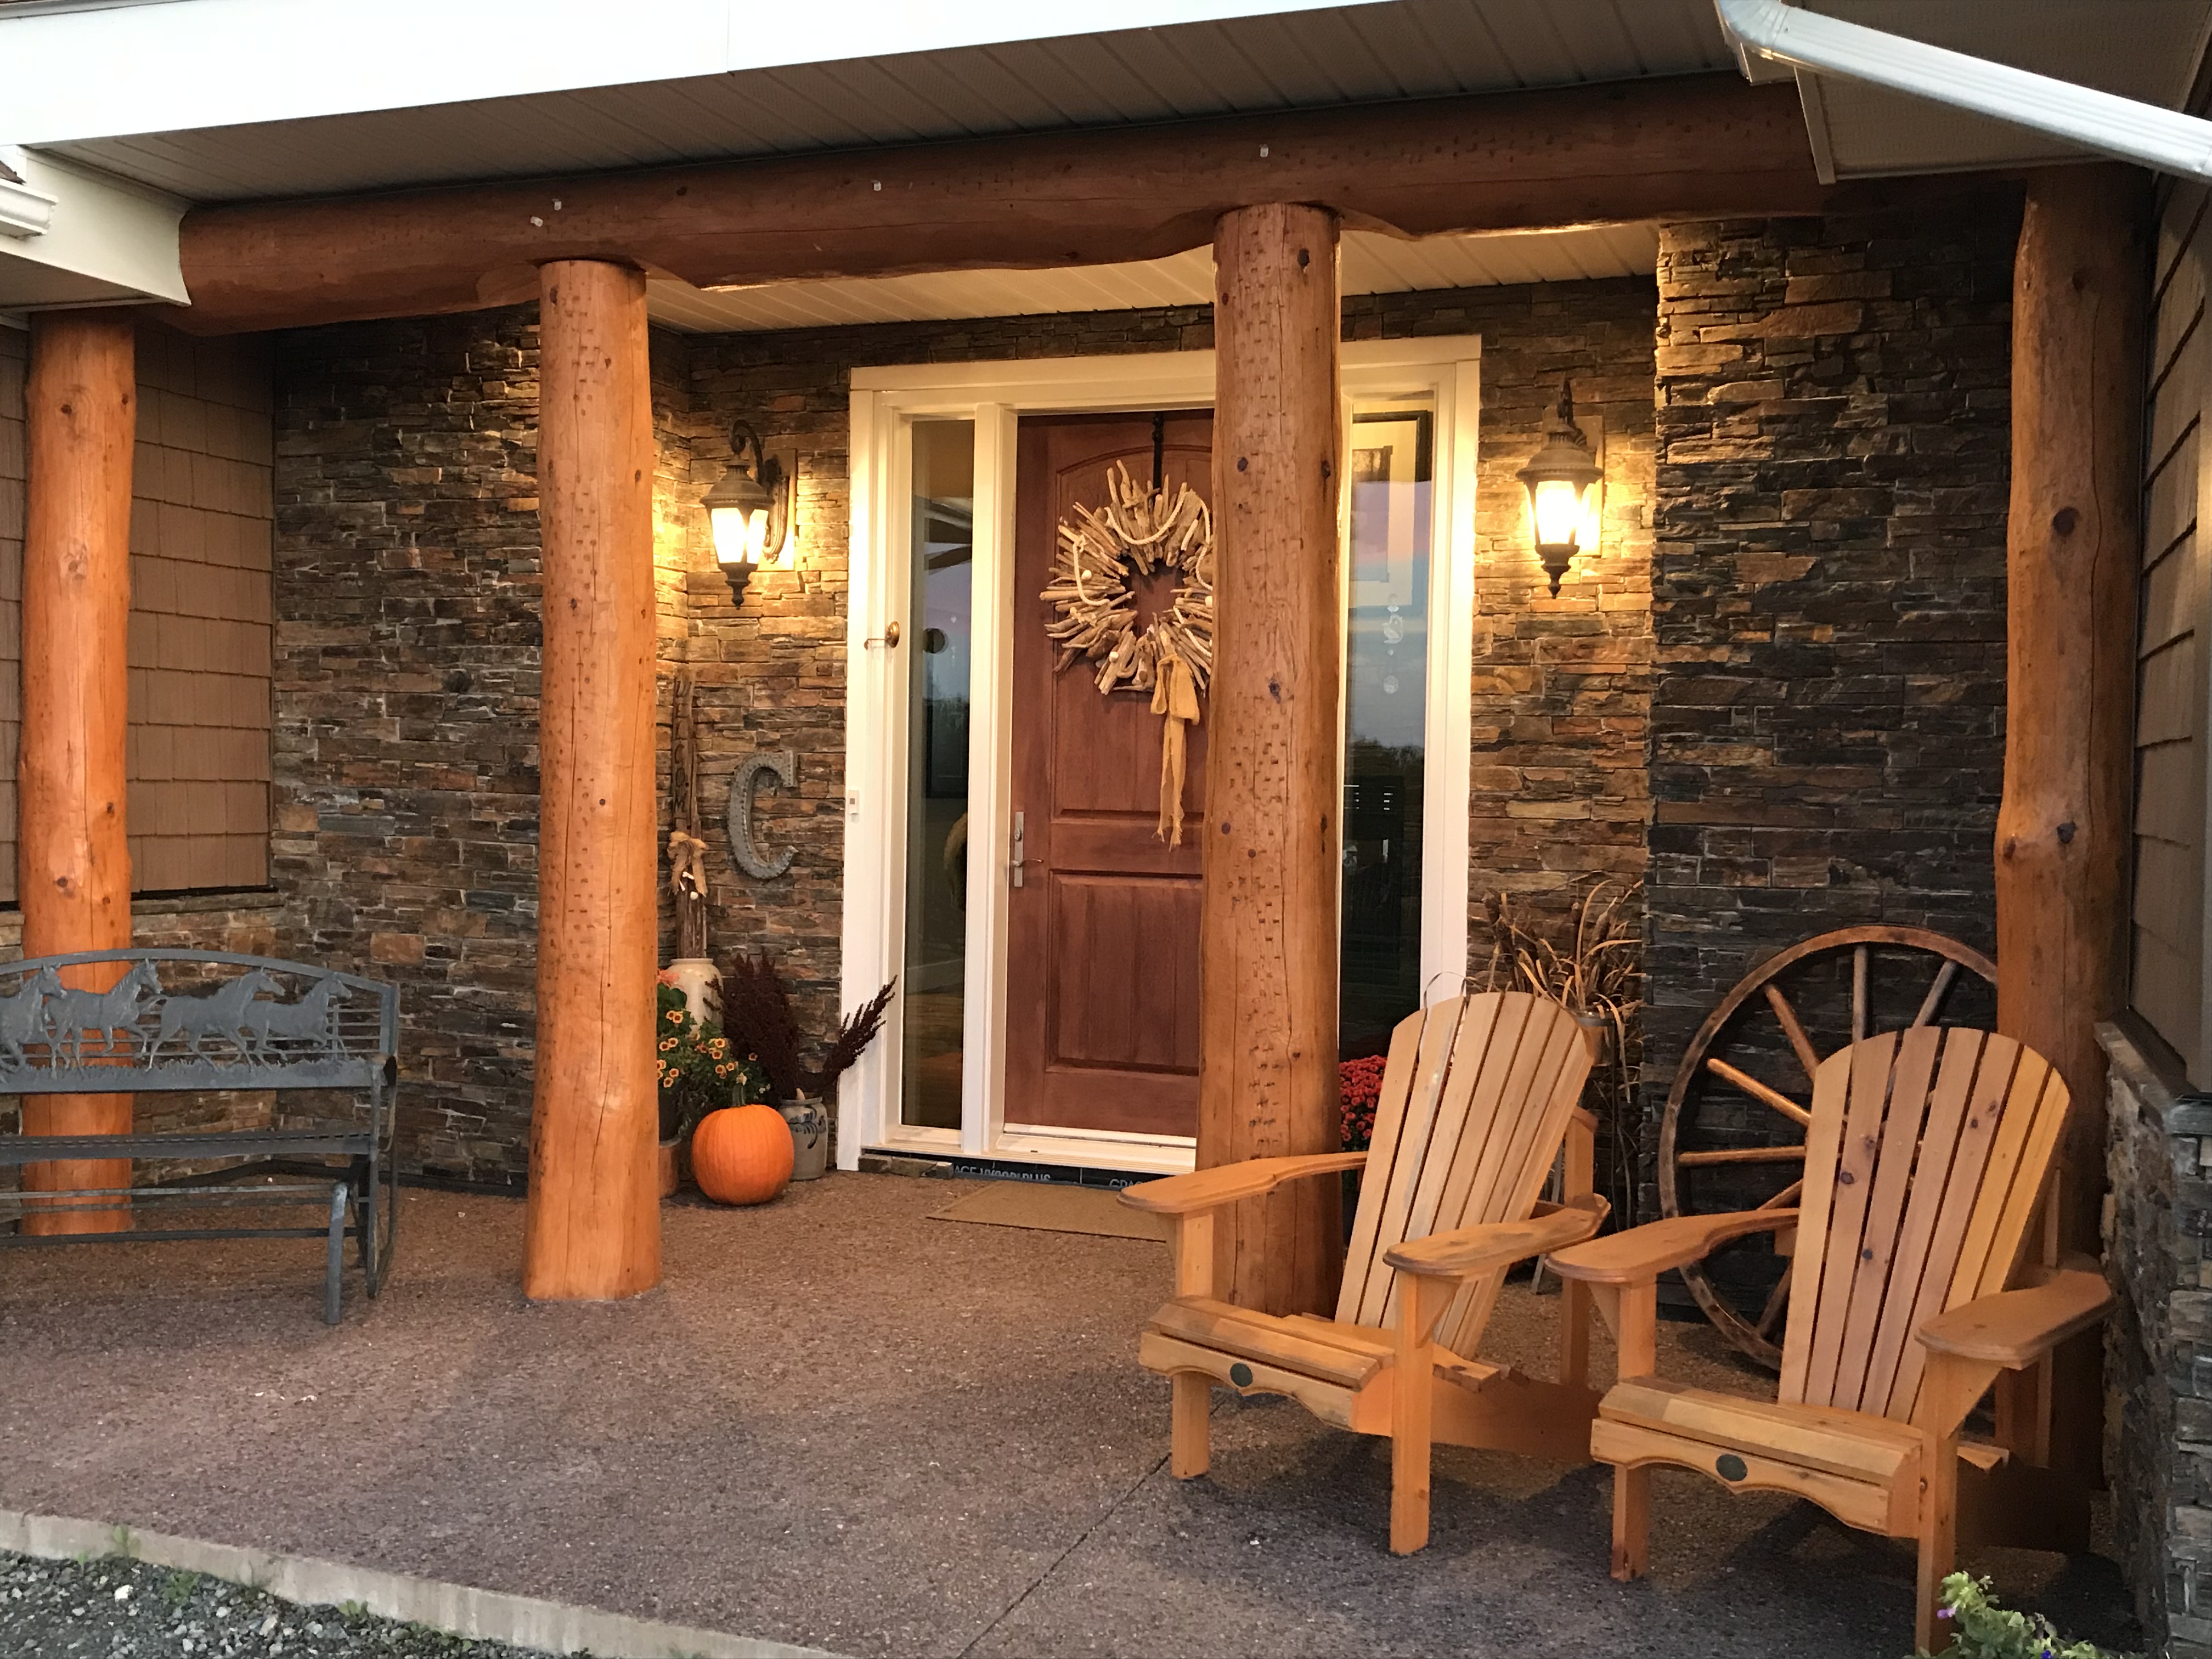 The porch of a wood and brick home in Nova Scotia with Muskoka Chairs